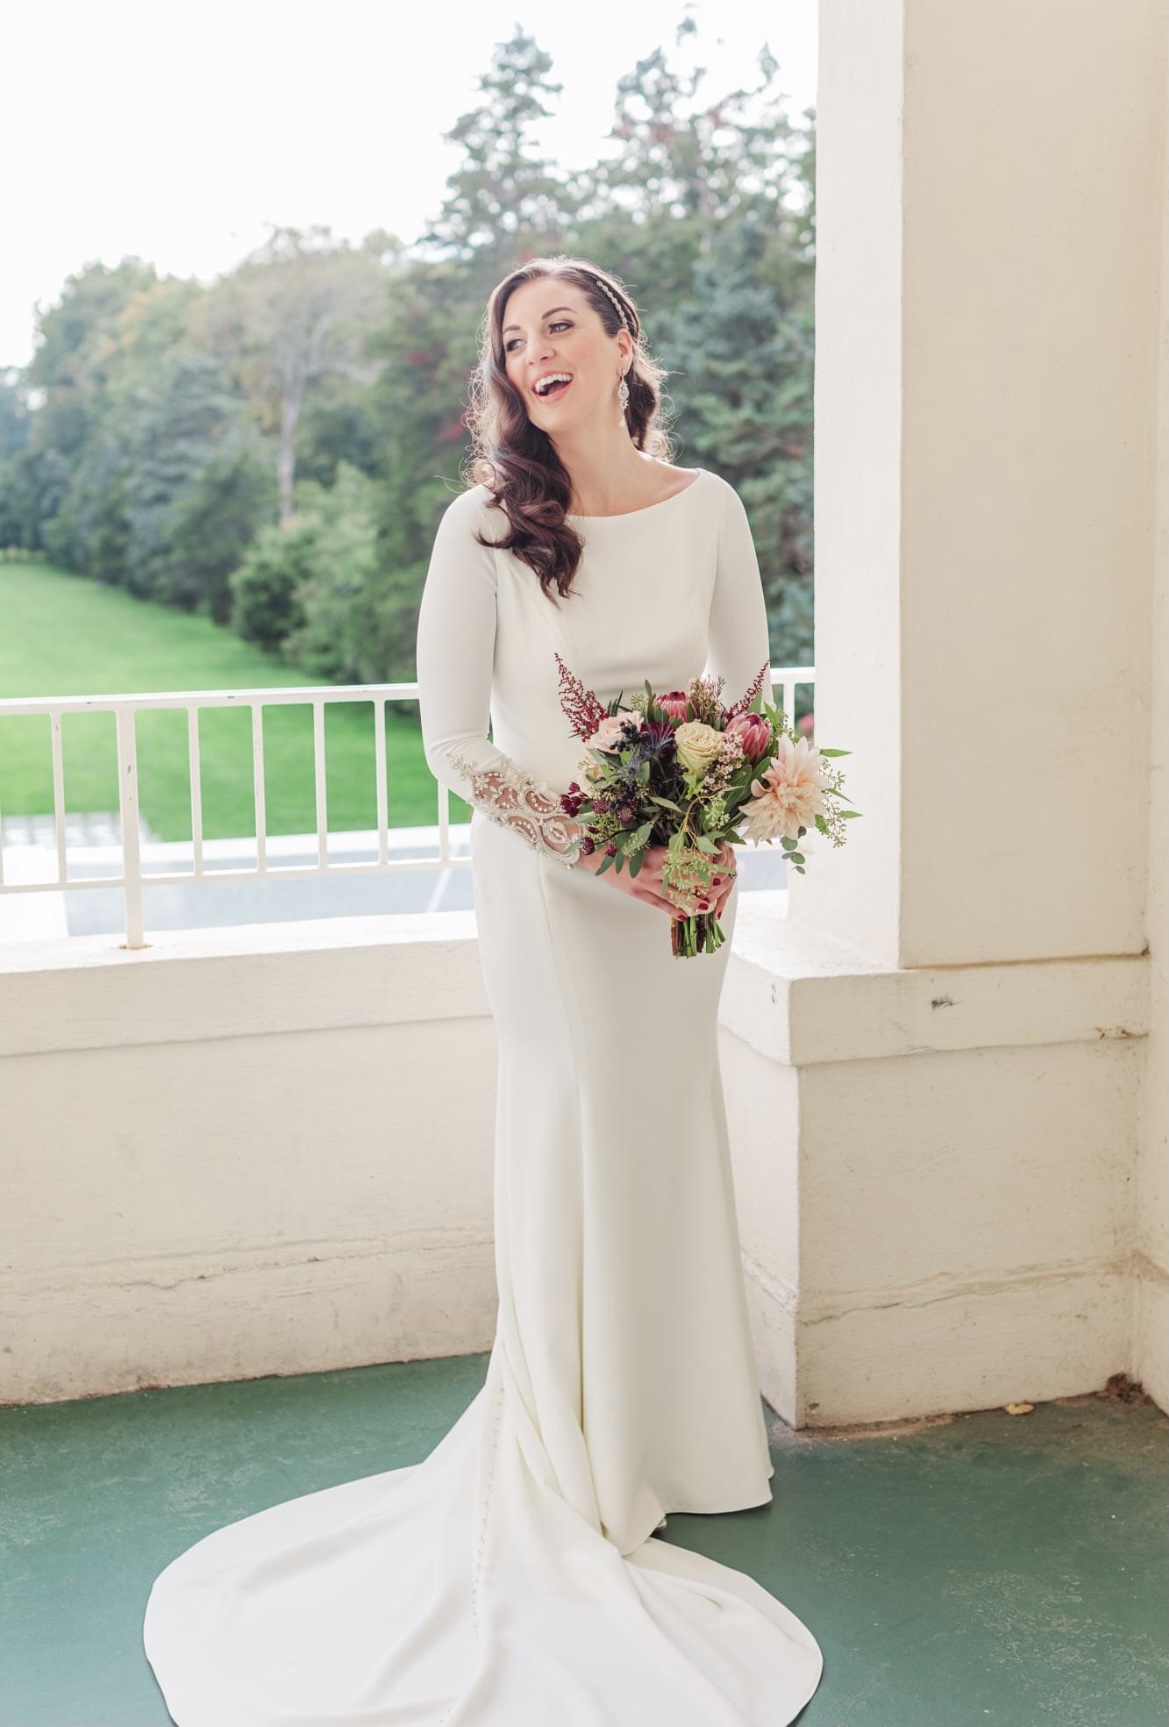 Bride In Simple Winter Wedding Dress Called Aston By Sottero And Midgley